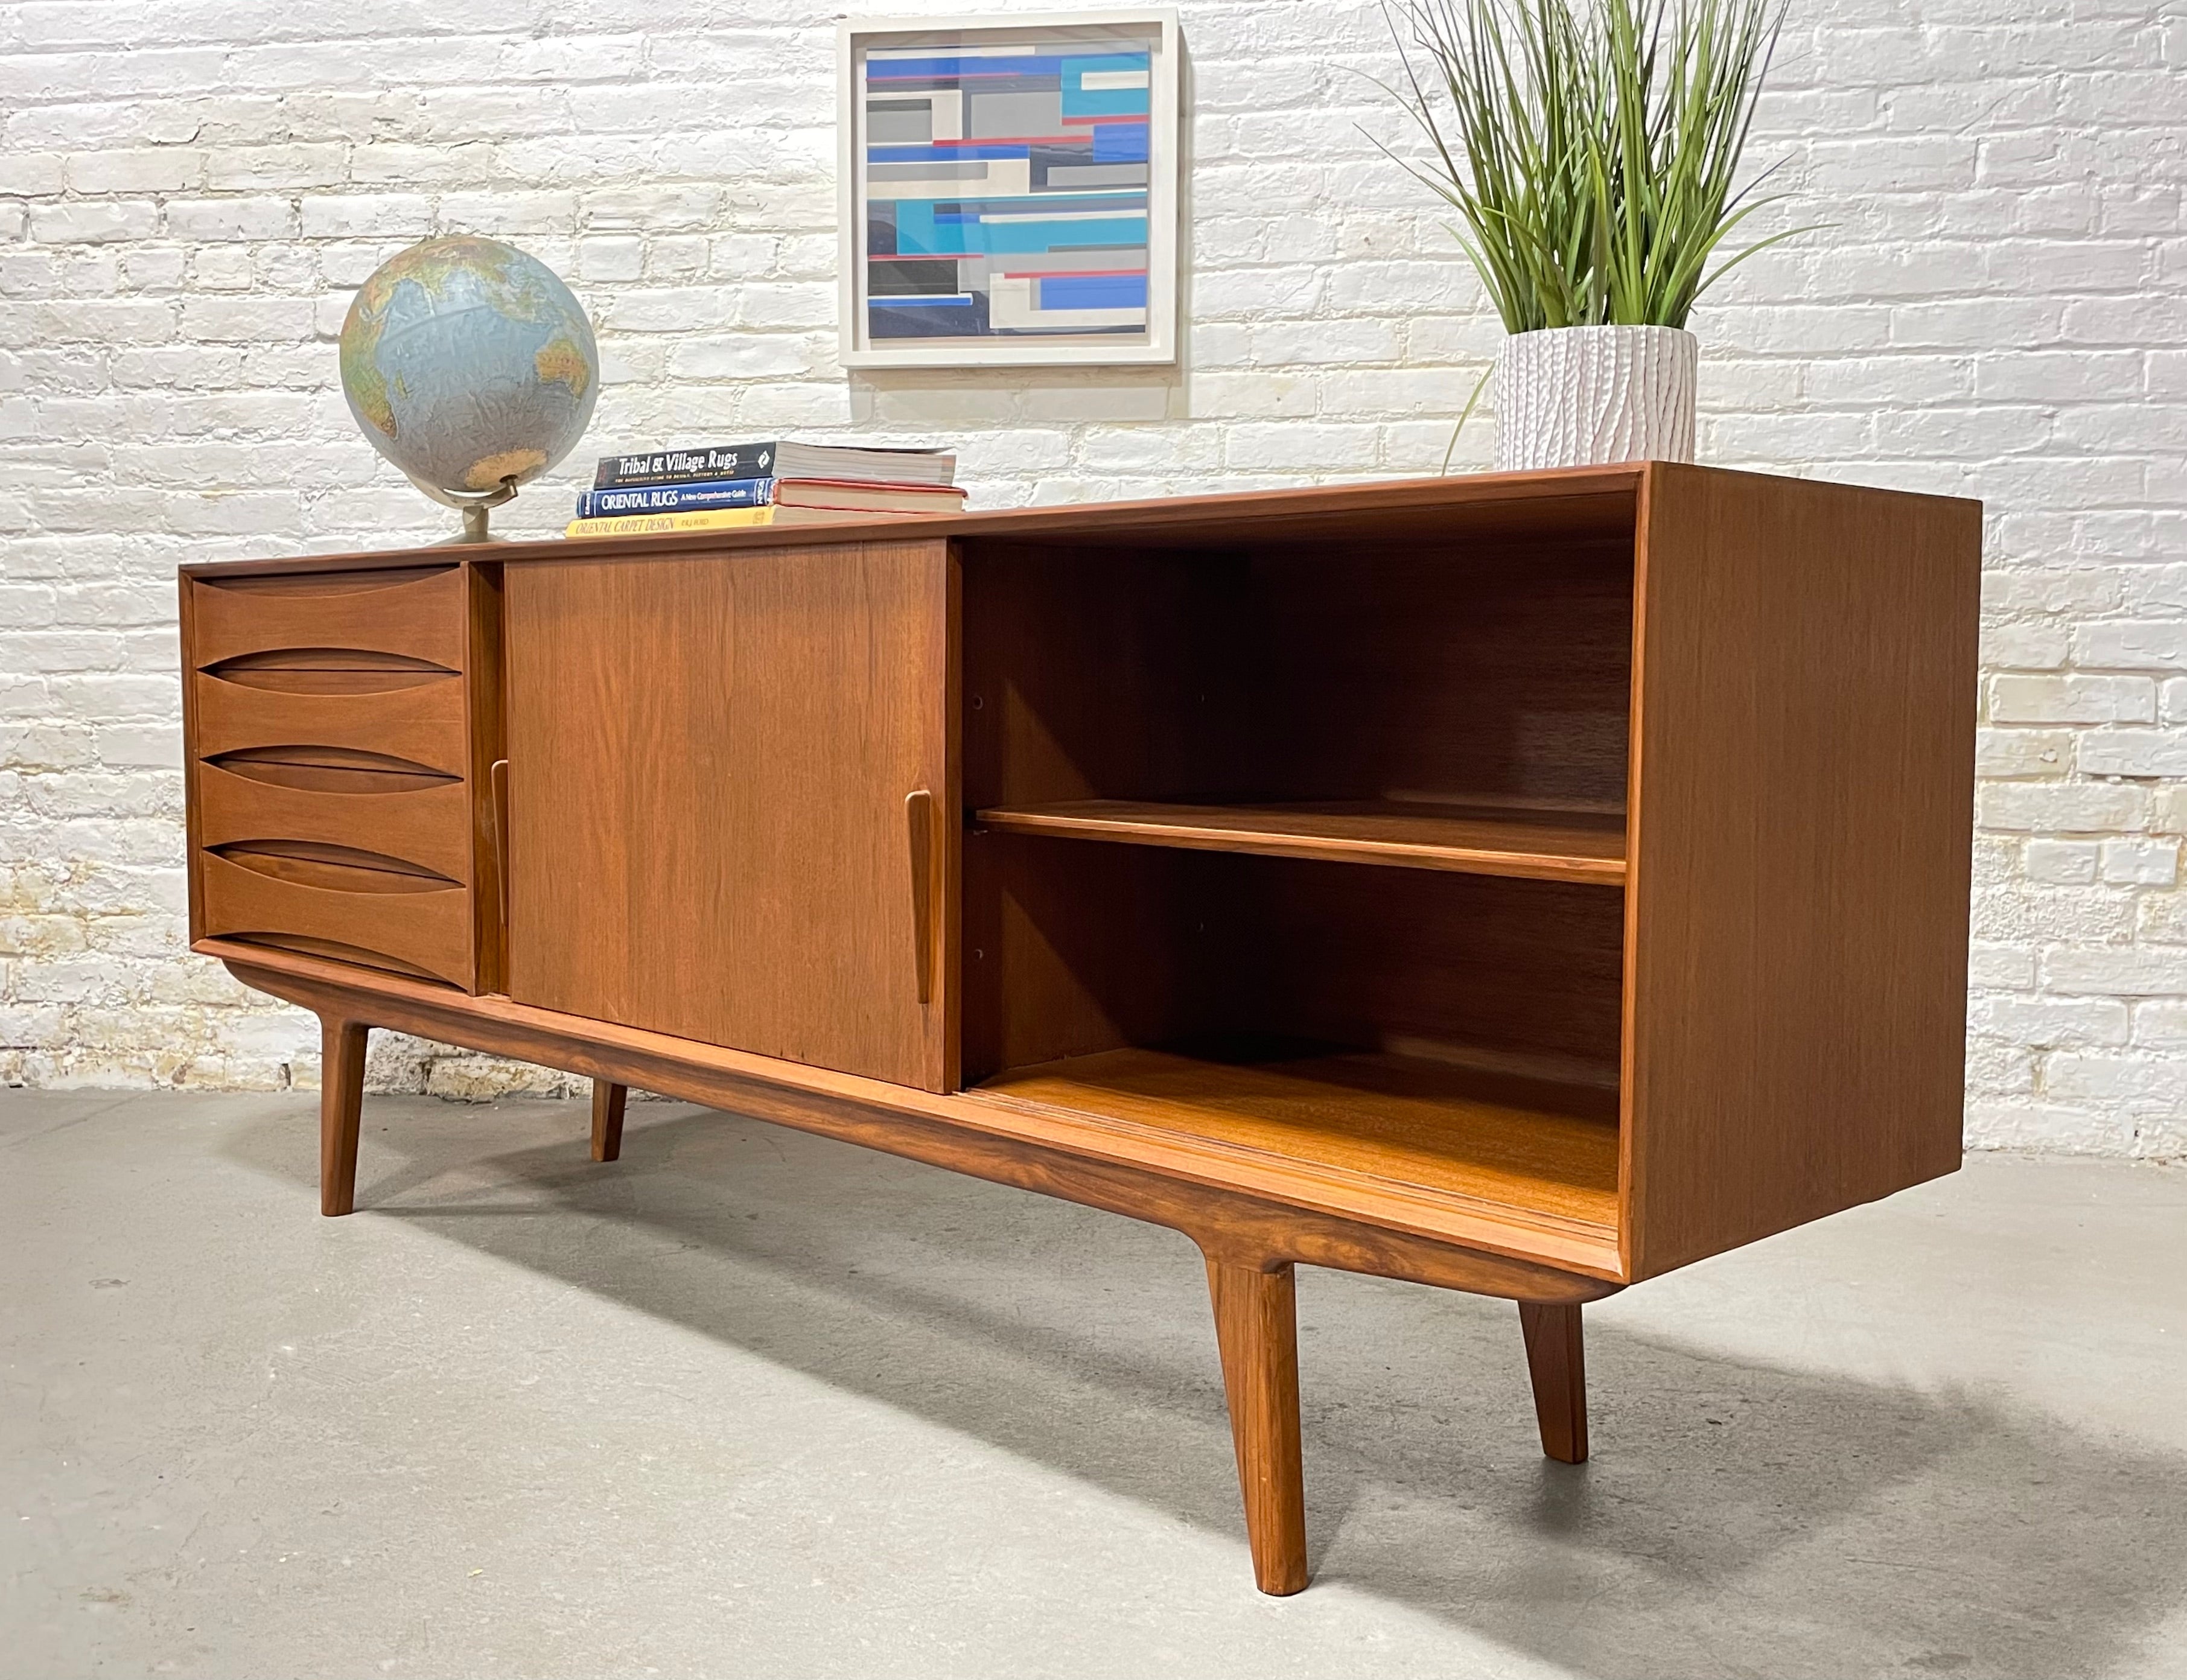 EXTRA LONG + HANDSOME Mid Century MODERN styled Teak CREDENZA / Media Stand